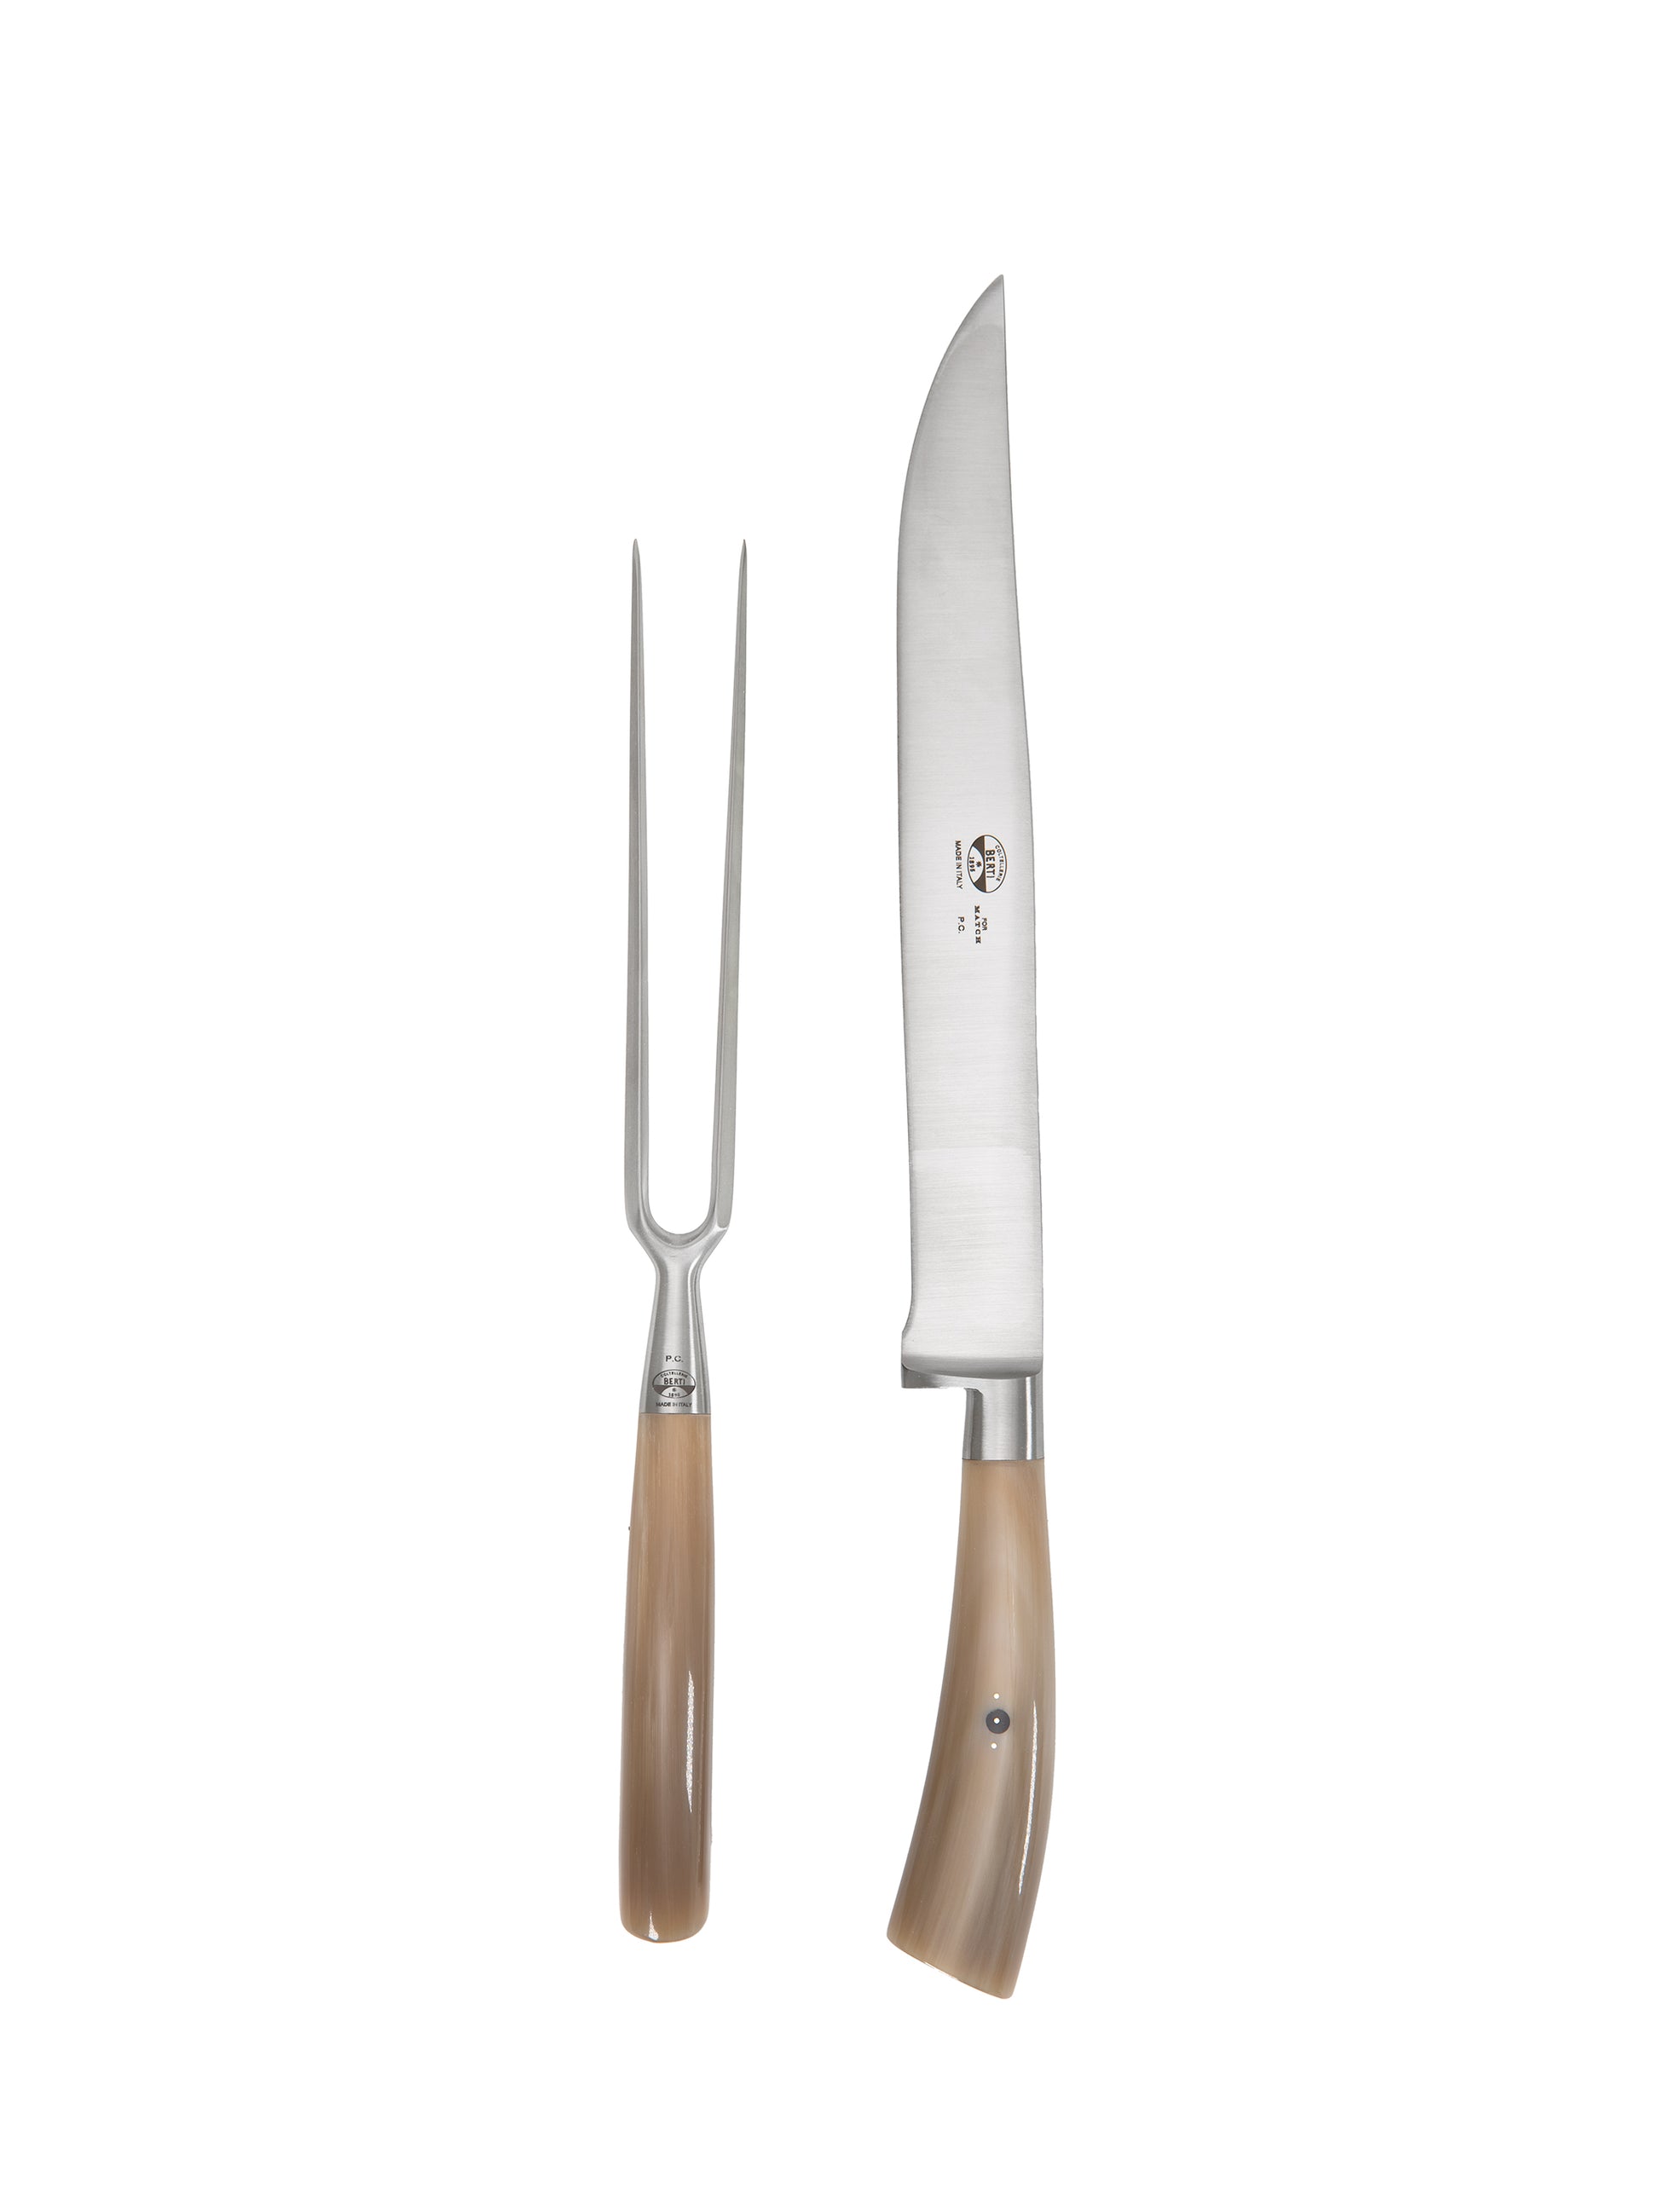 Stainless Steel Canape Knives with Horn Handle, Set of 4